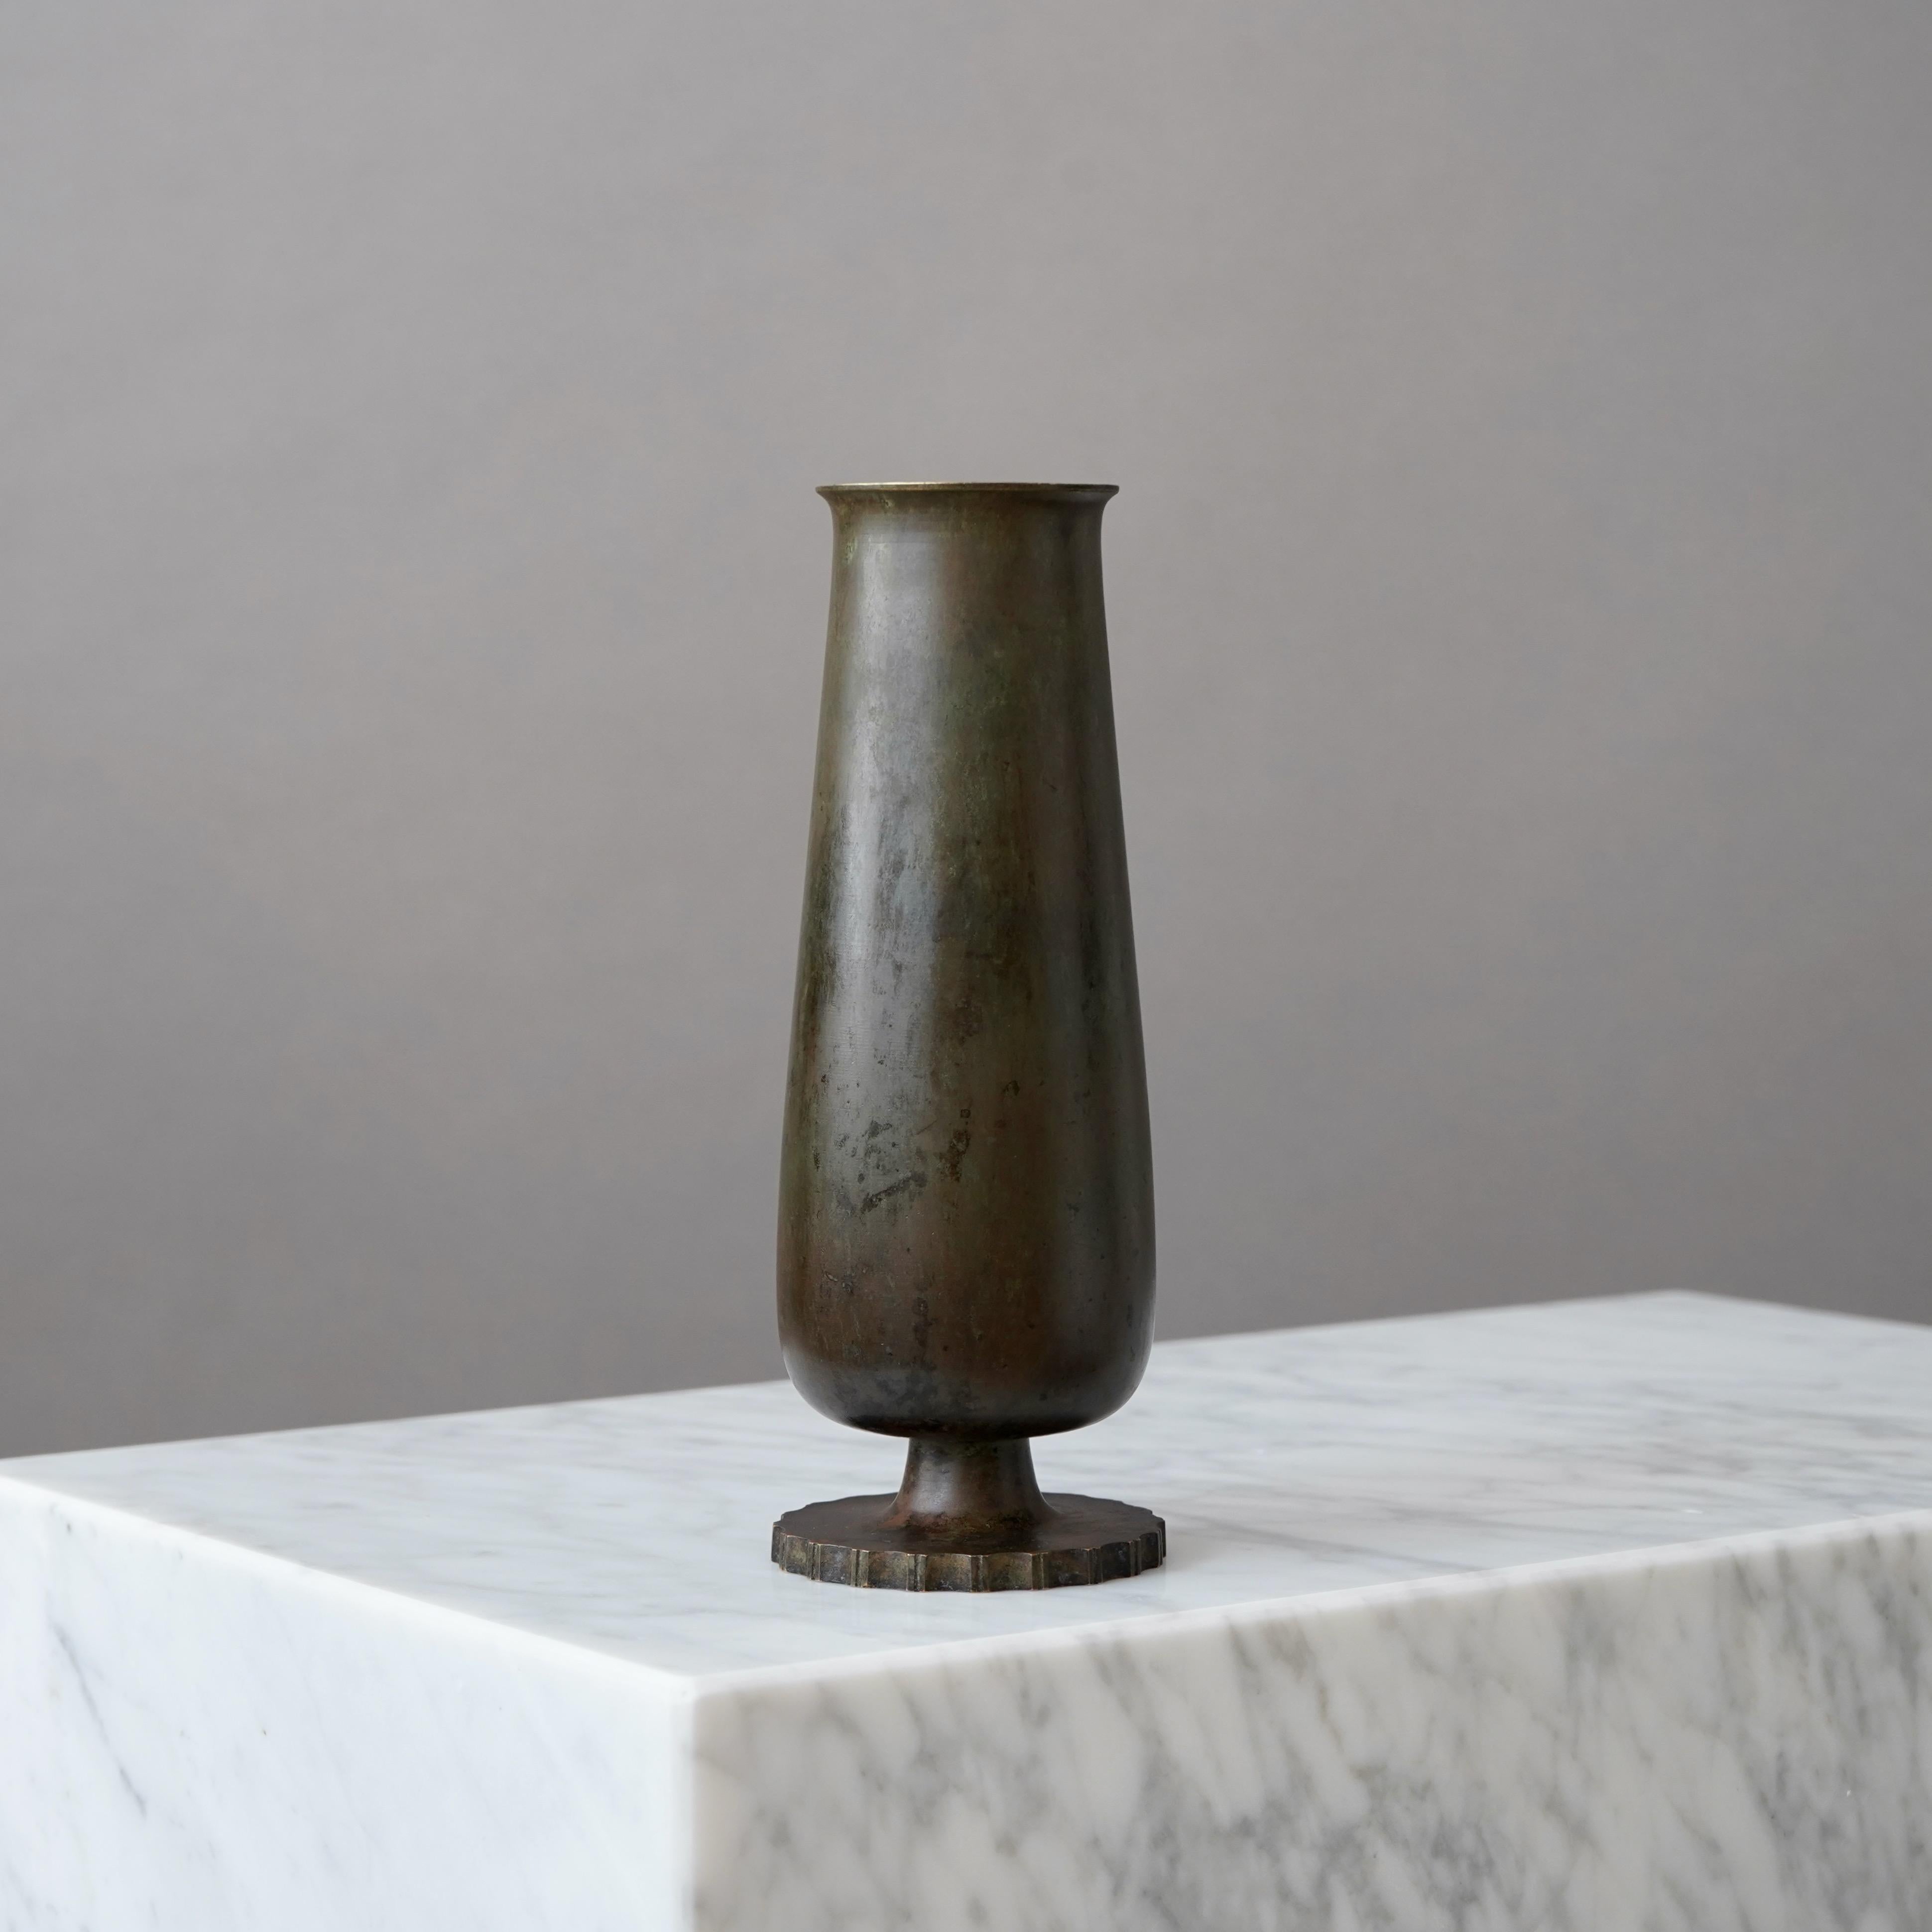 A beautiful bronze vase with amazing patina. 
Made by GAB Guldsmedsaktiebolaget, Sweden, 1930s.  

Great condition, with a few light scratches.
Stamped 'BRONS' and makers mark.